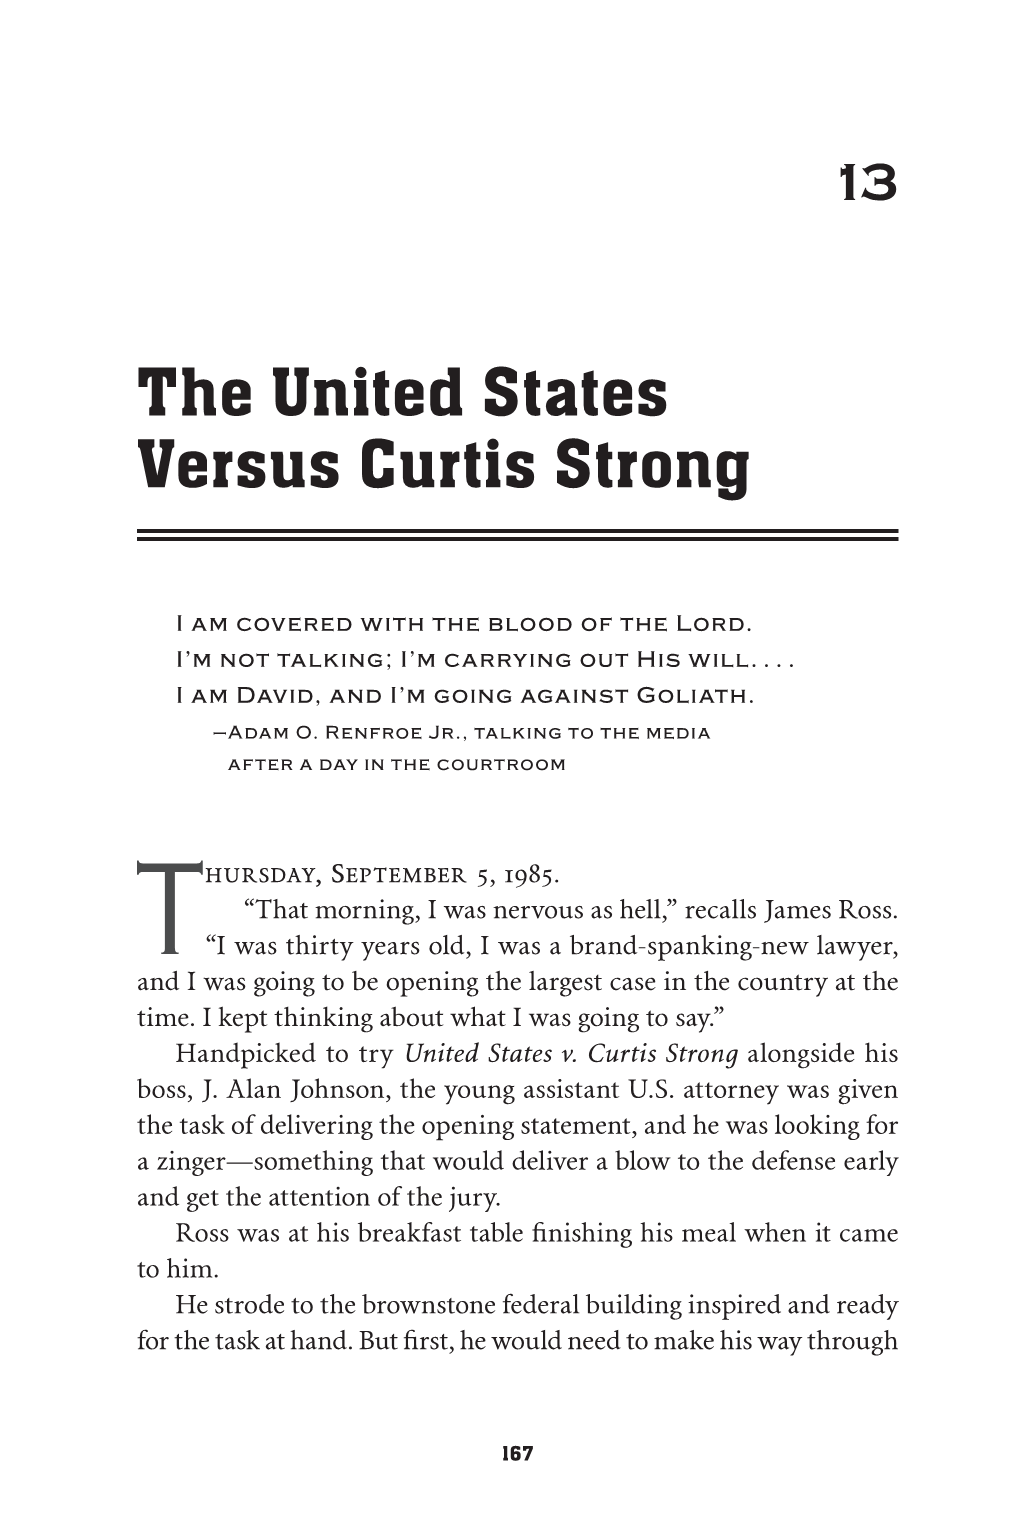 The United States Versus Curtis Strong